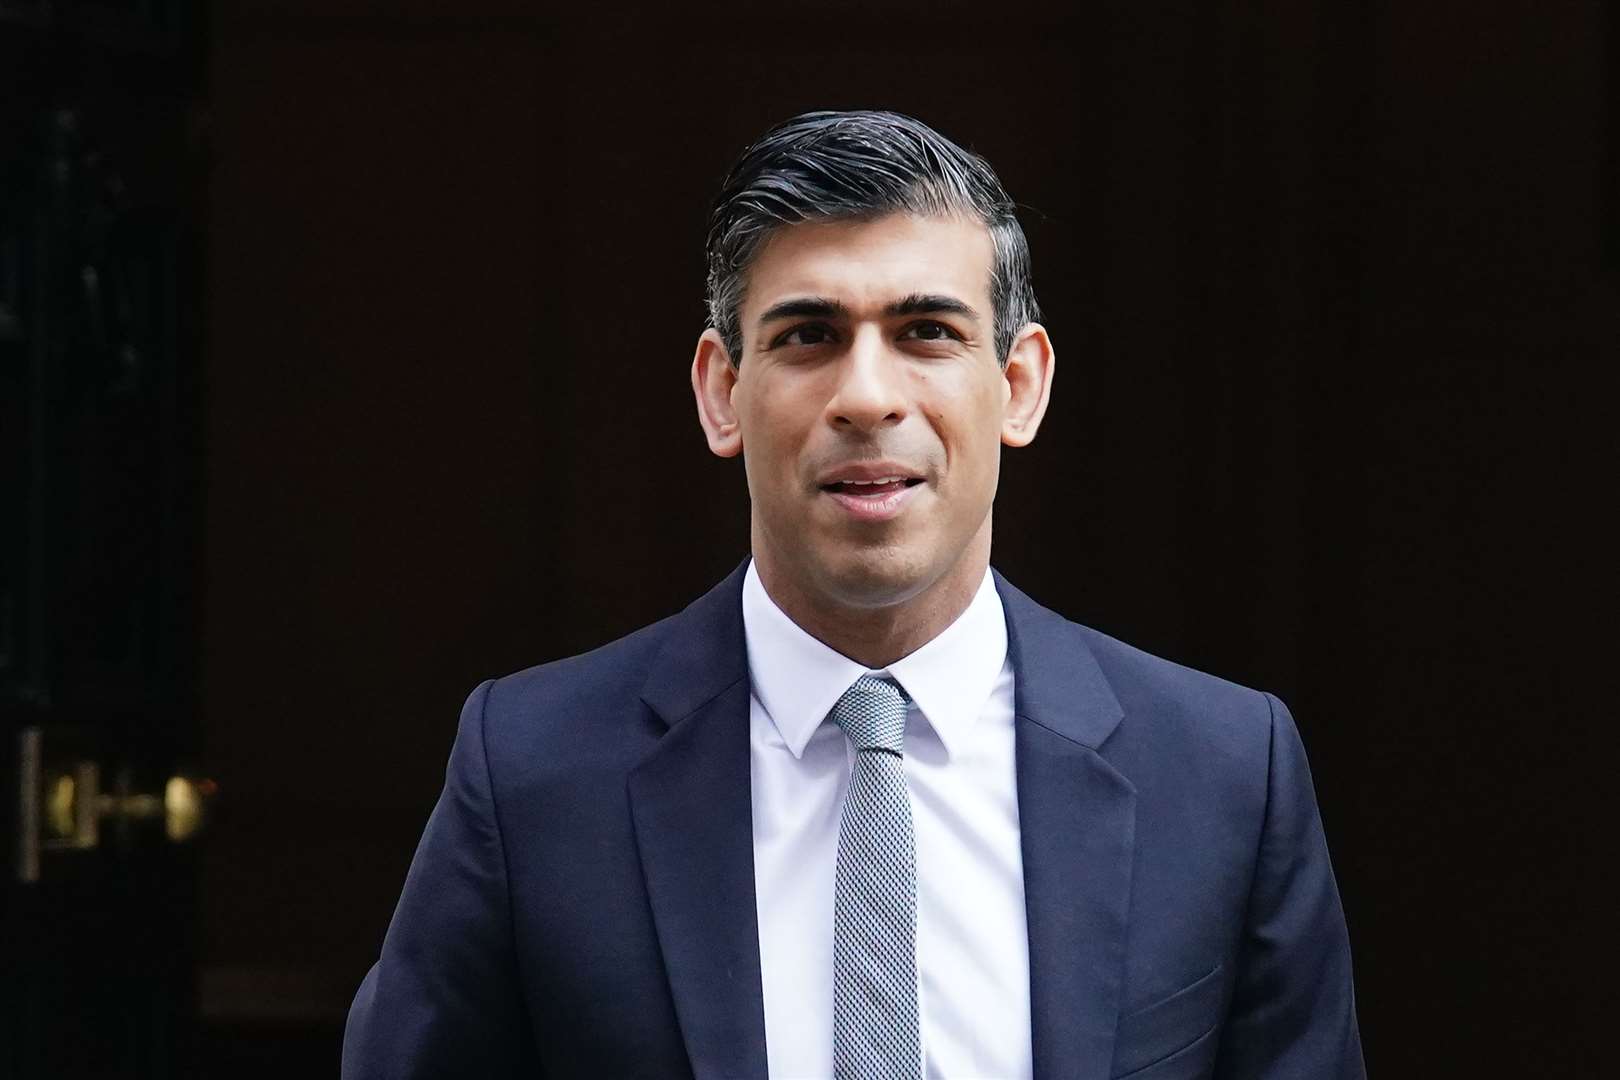 Chancellor of the Exchequer Rishi Sunak leaves 11 Downing Street as he heads to the House of Commons, London, to deliver his Spring Statement. Picture date: Wednesday March 23, 2022. (55854766)